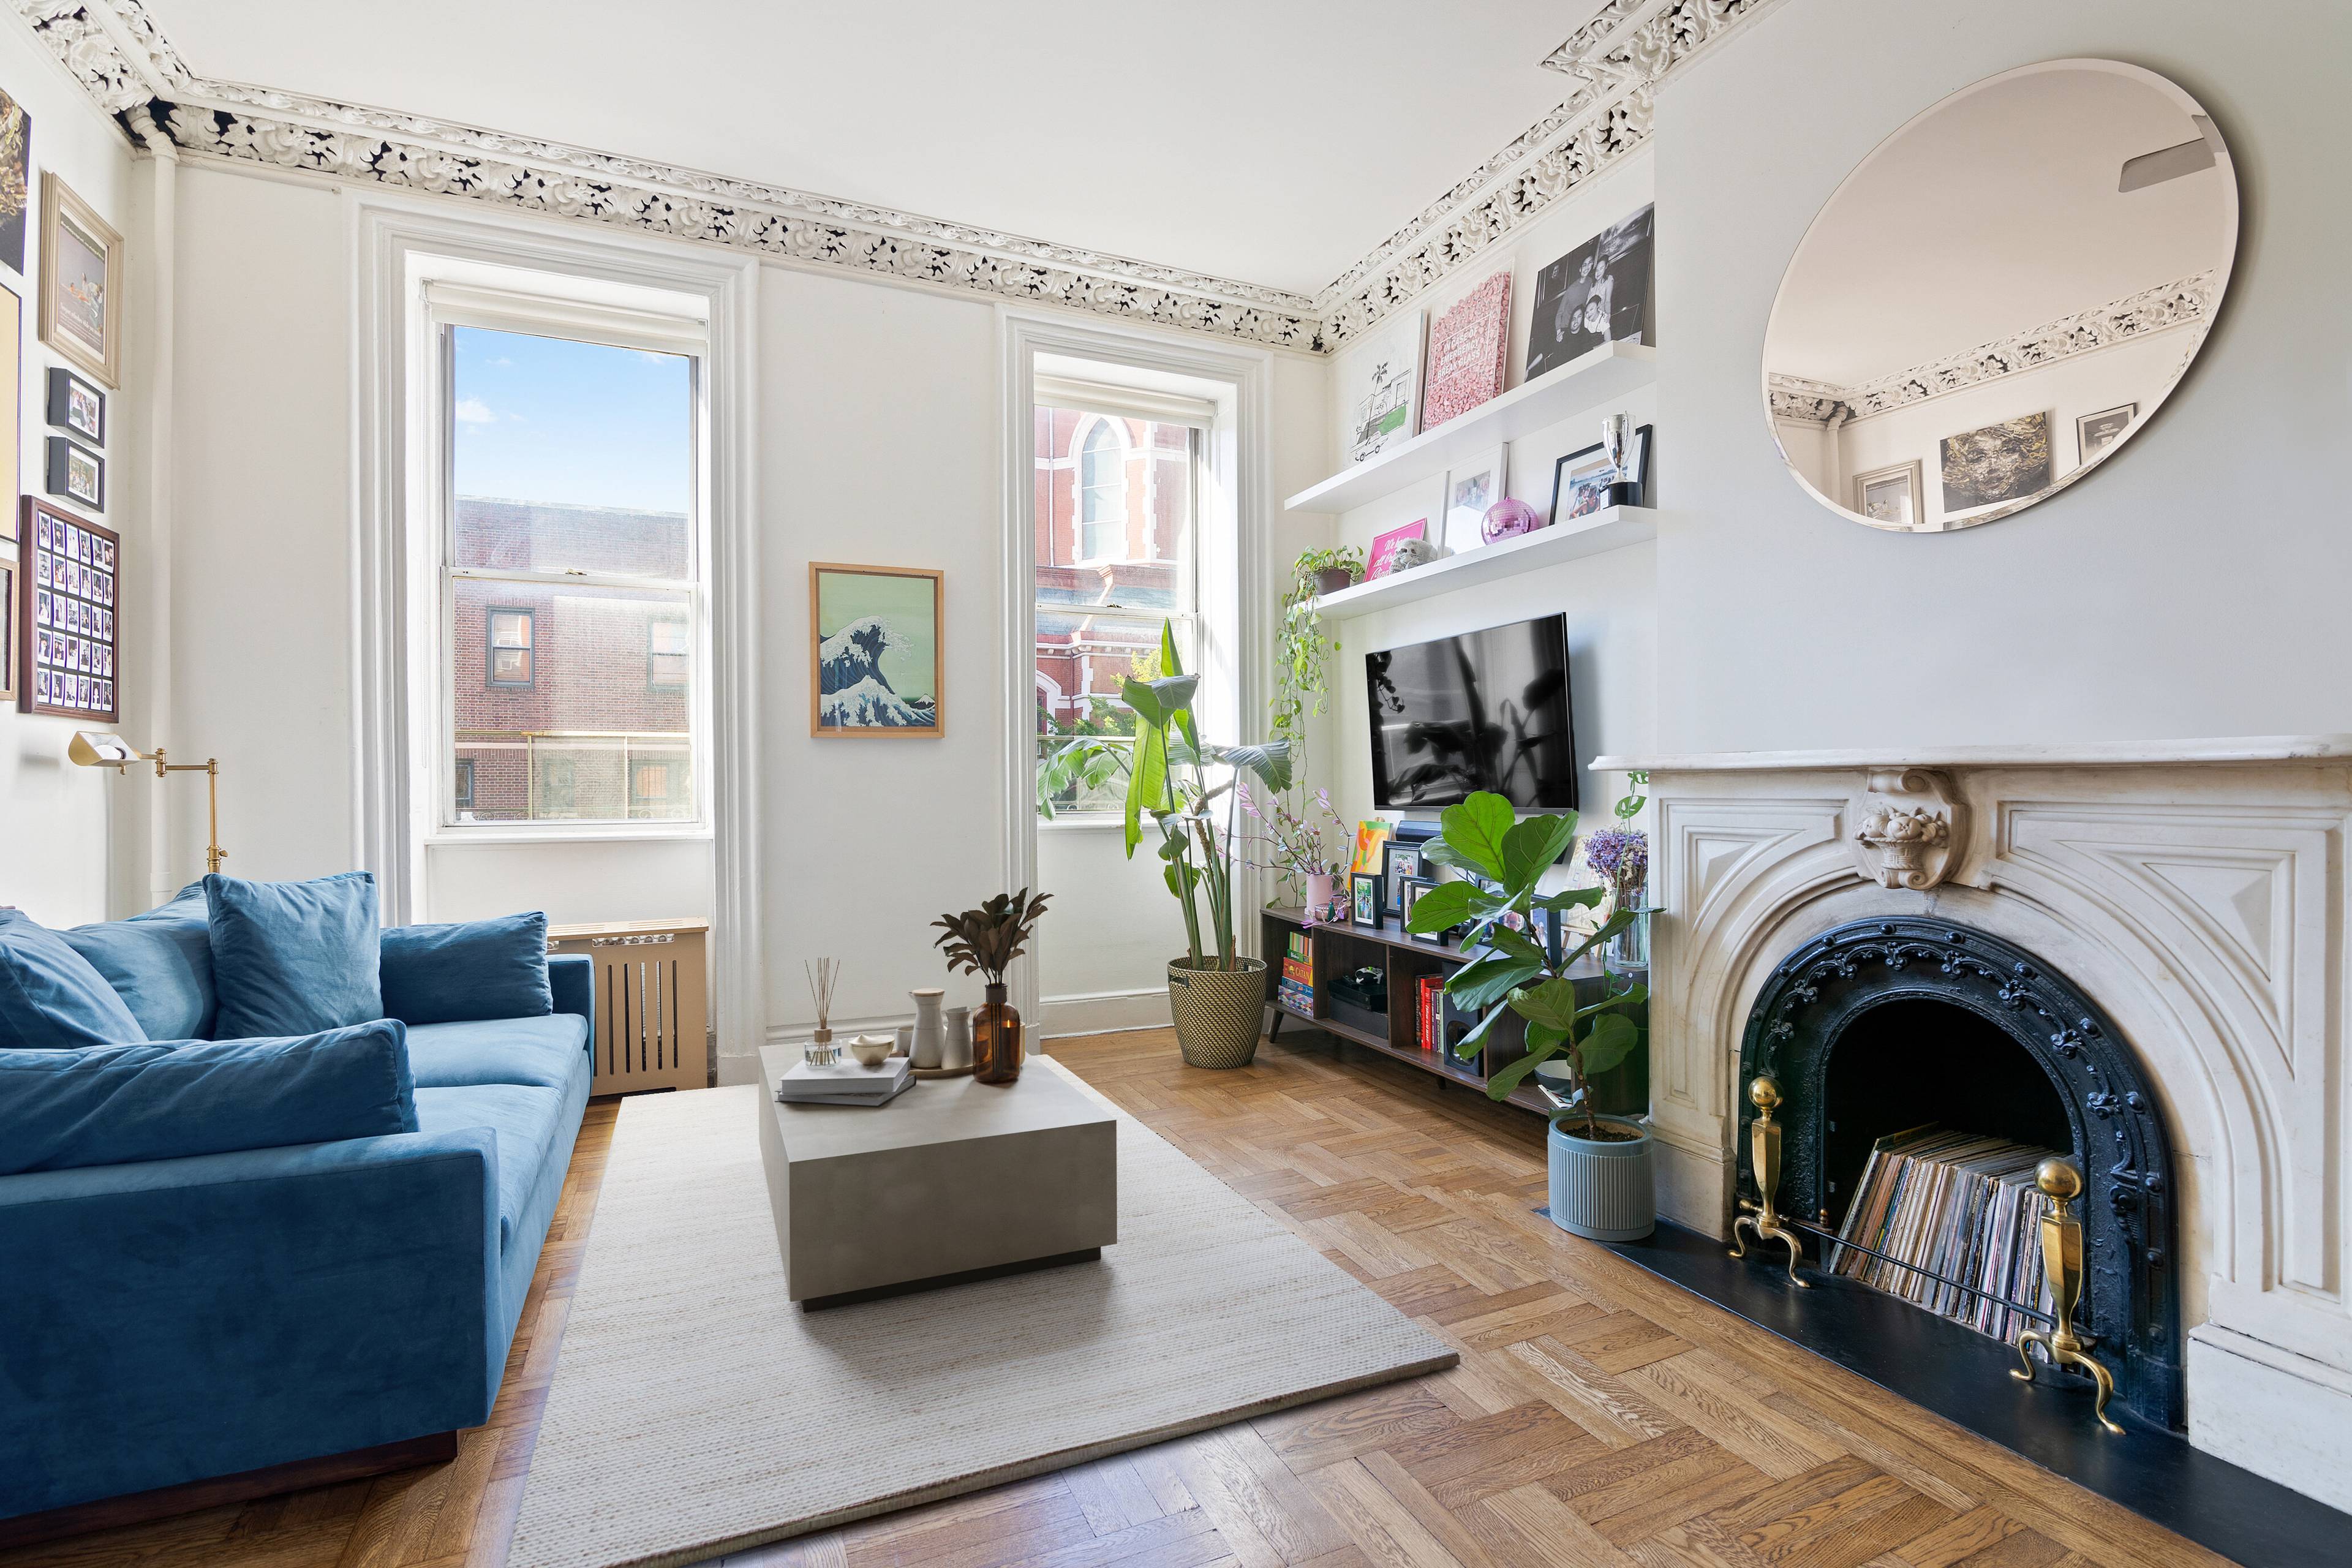 An enchanting Carroll Gardens co op with a private backyard, this rarely available 2 bedroom, 1 bathroom home is the quintessence of quaint Brooklyn charm.